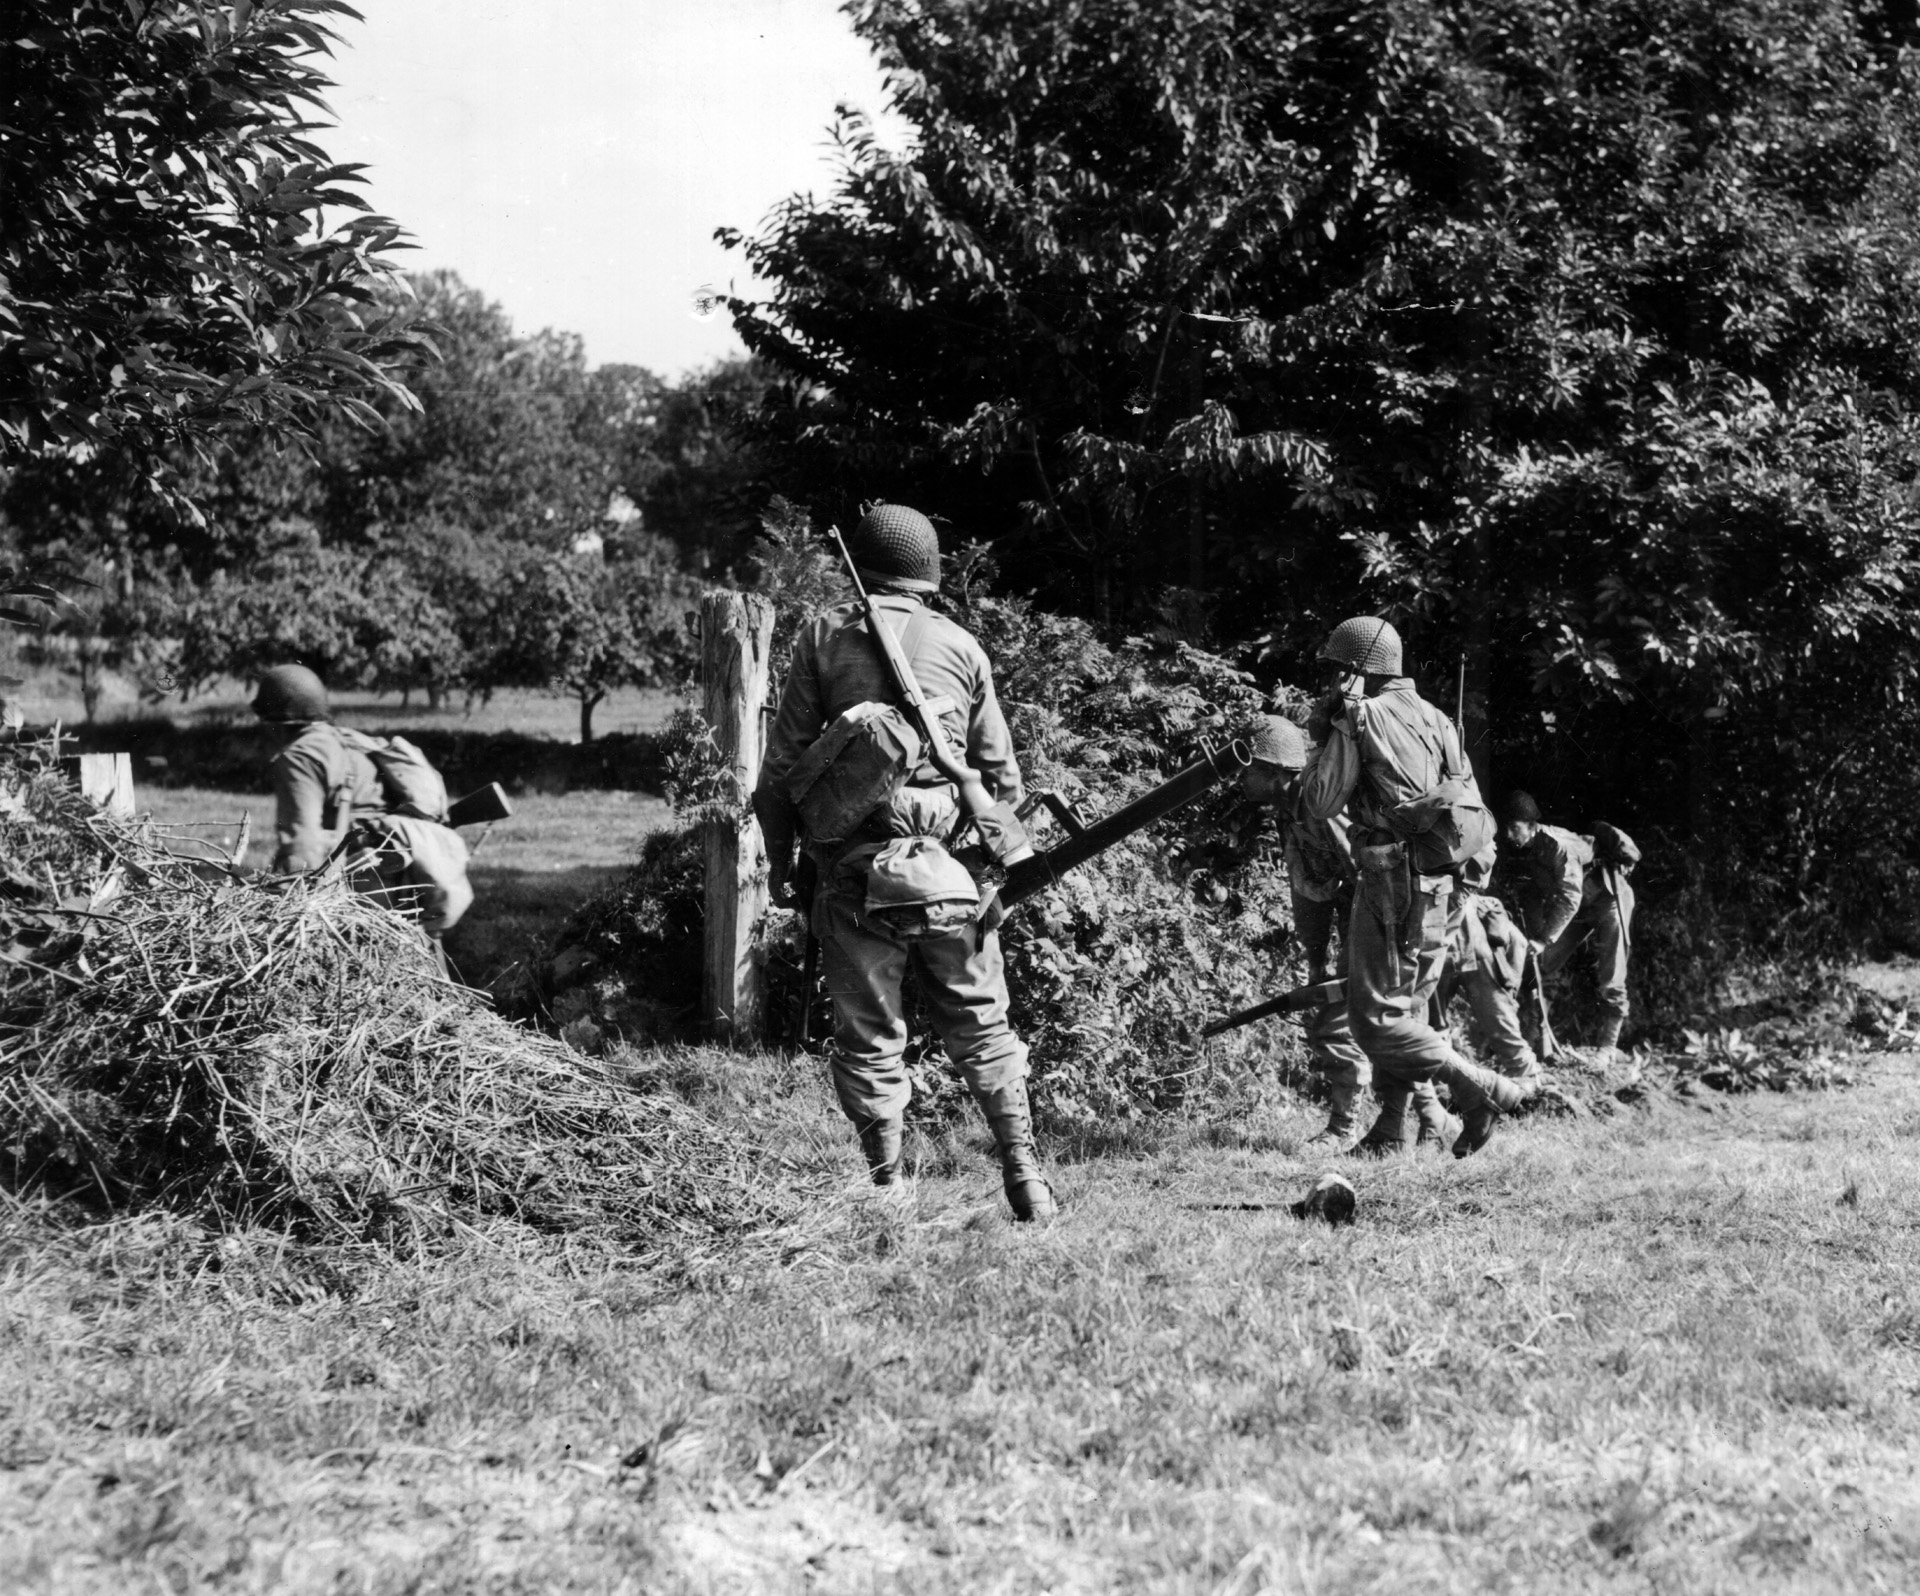 Men from Company A, 11th Infantry, 30th Division, advance through a break in the hedgerows on August 9. The soldier at right is using his handy-talky radio.